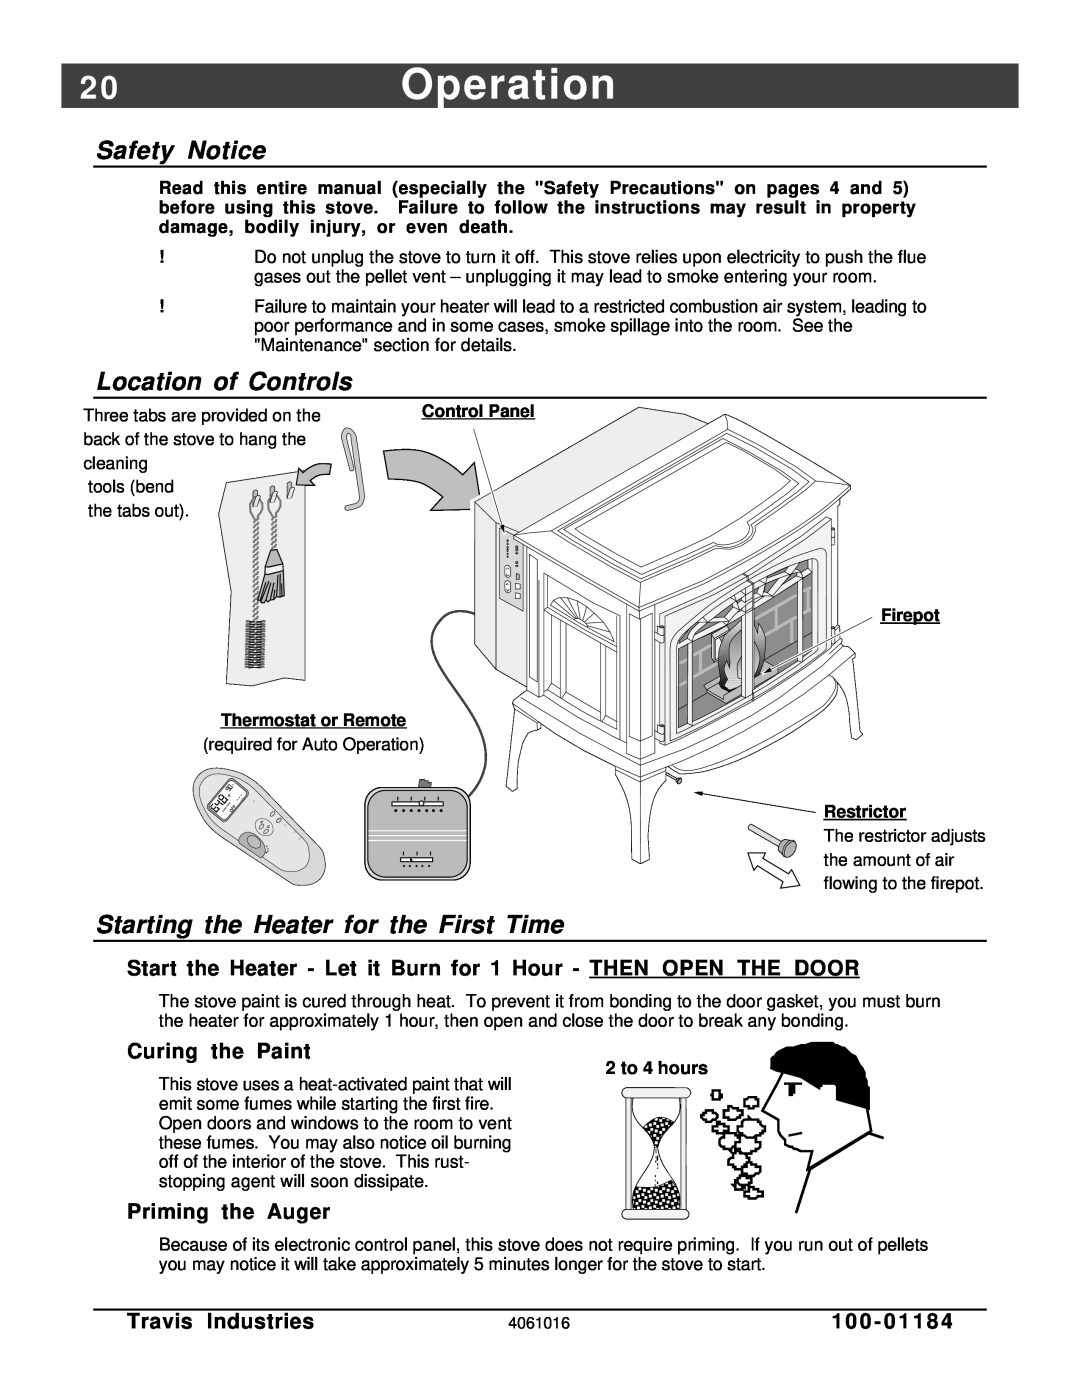 Lopi Leyden Pellet Stove 2 0Operation, Safety Notice, Location of Controls, Starting the Heater for the First Time, 1 0 0 